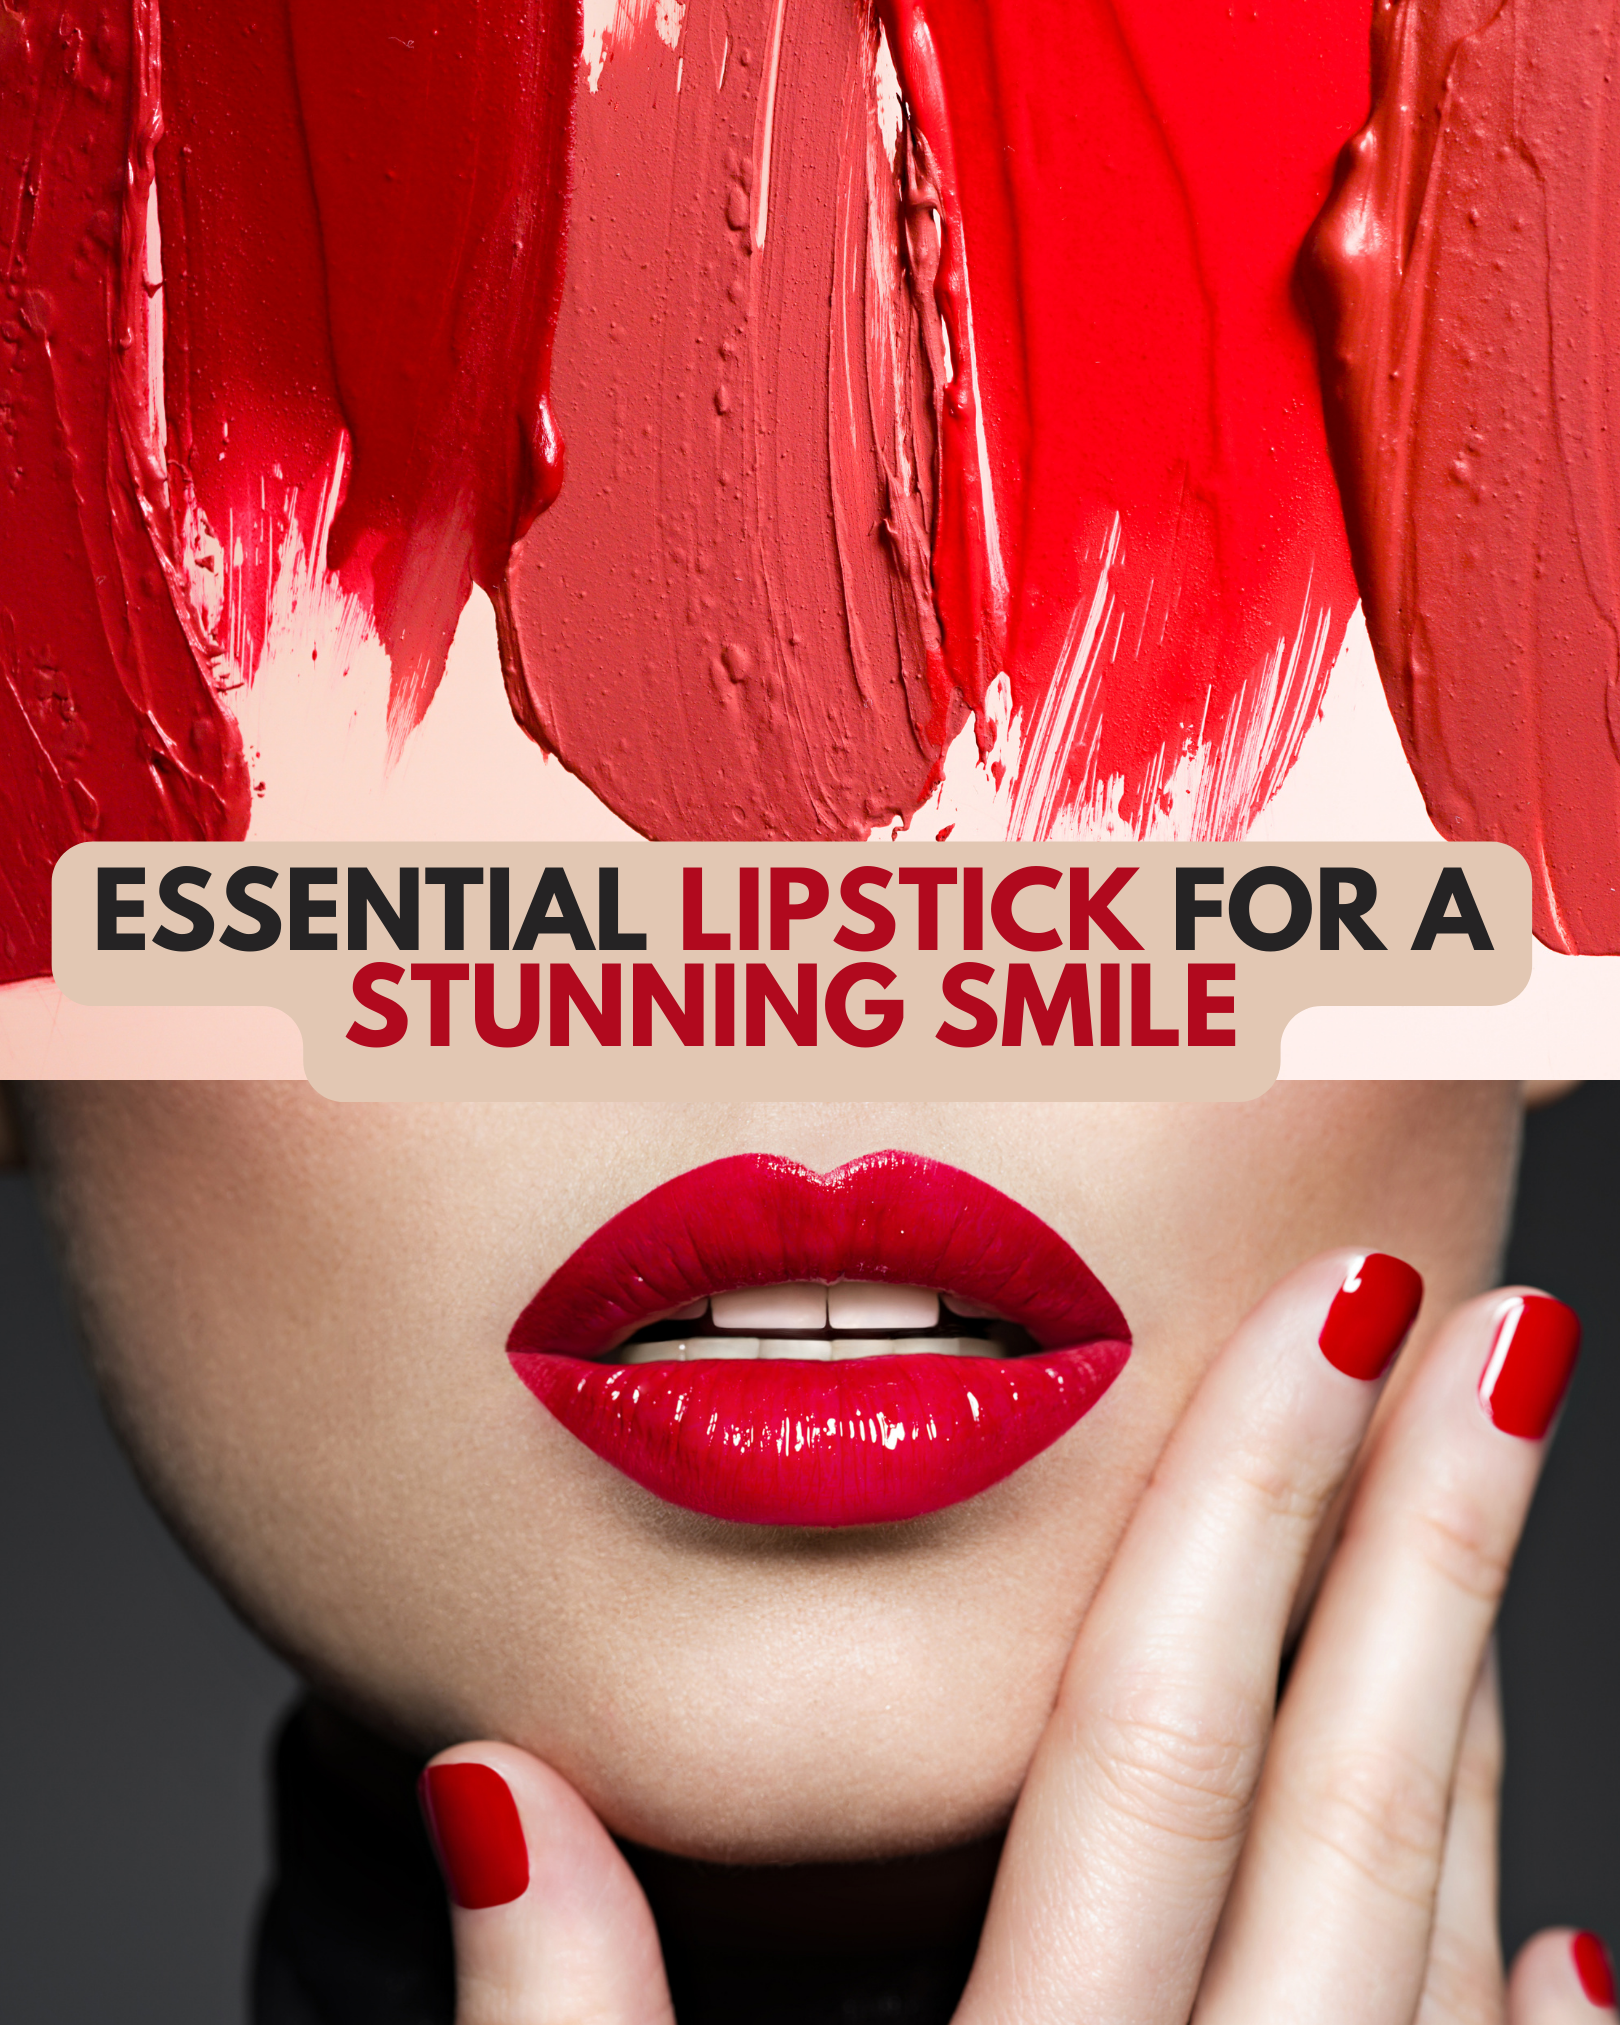 7 Best Essential Lipstick Products for a Stunning Smile